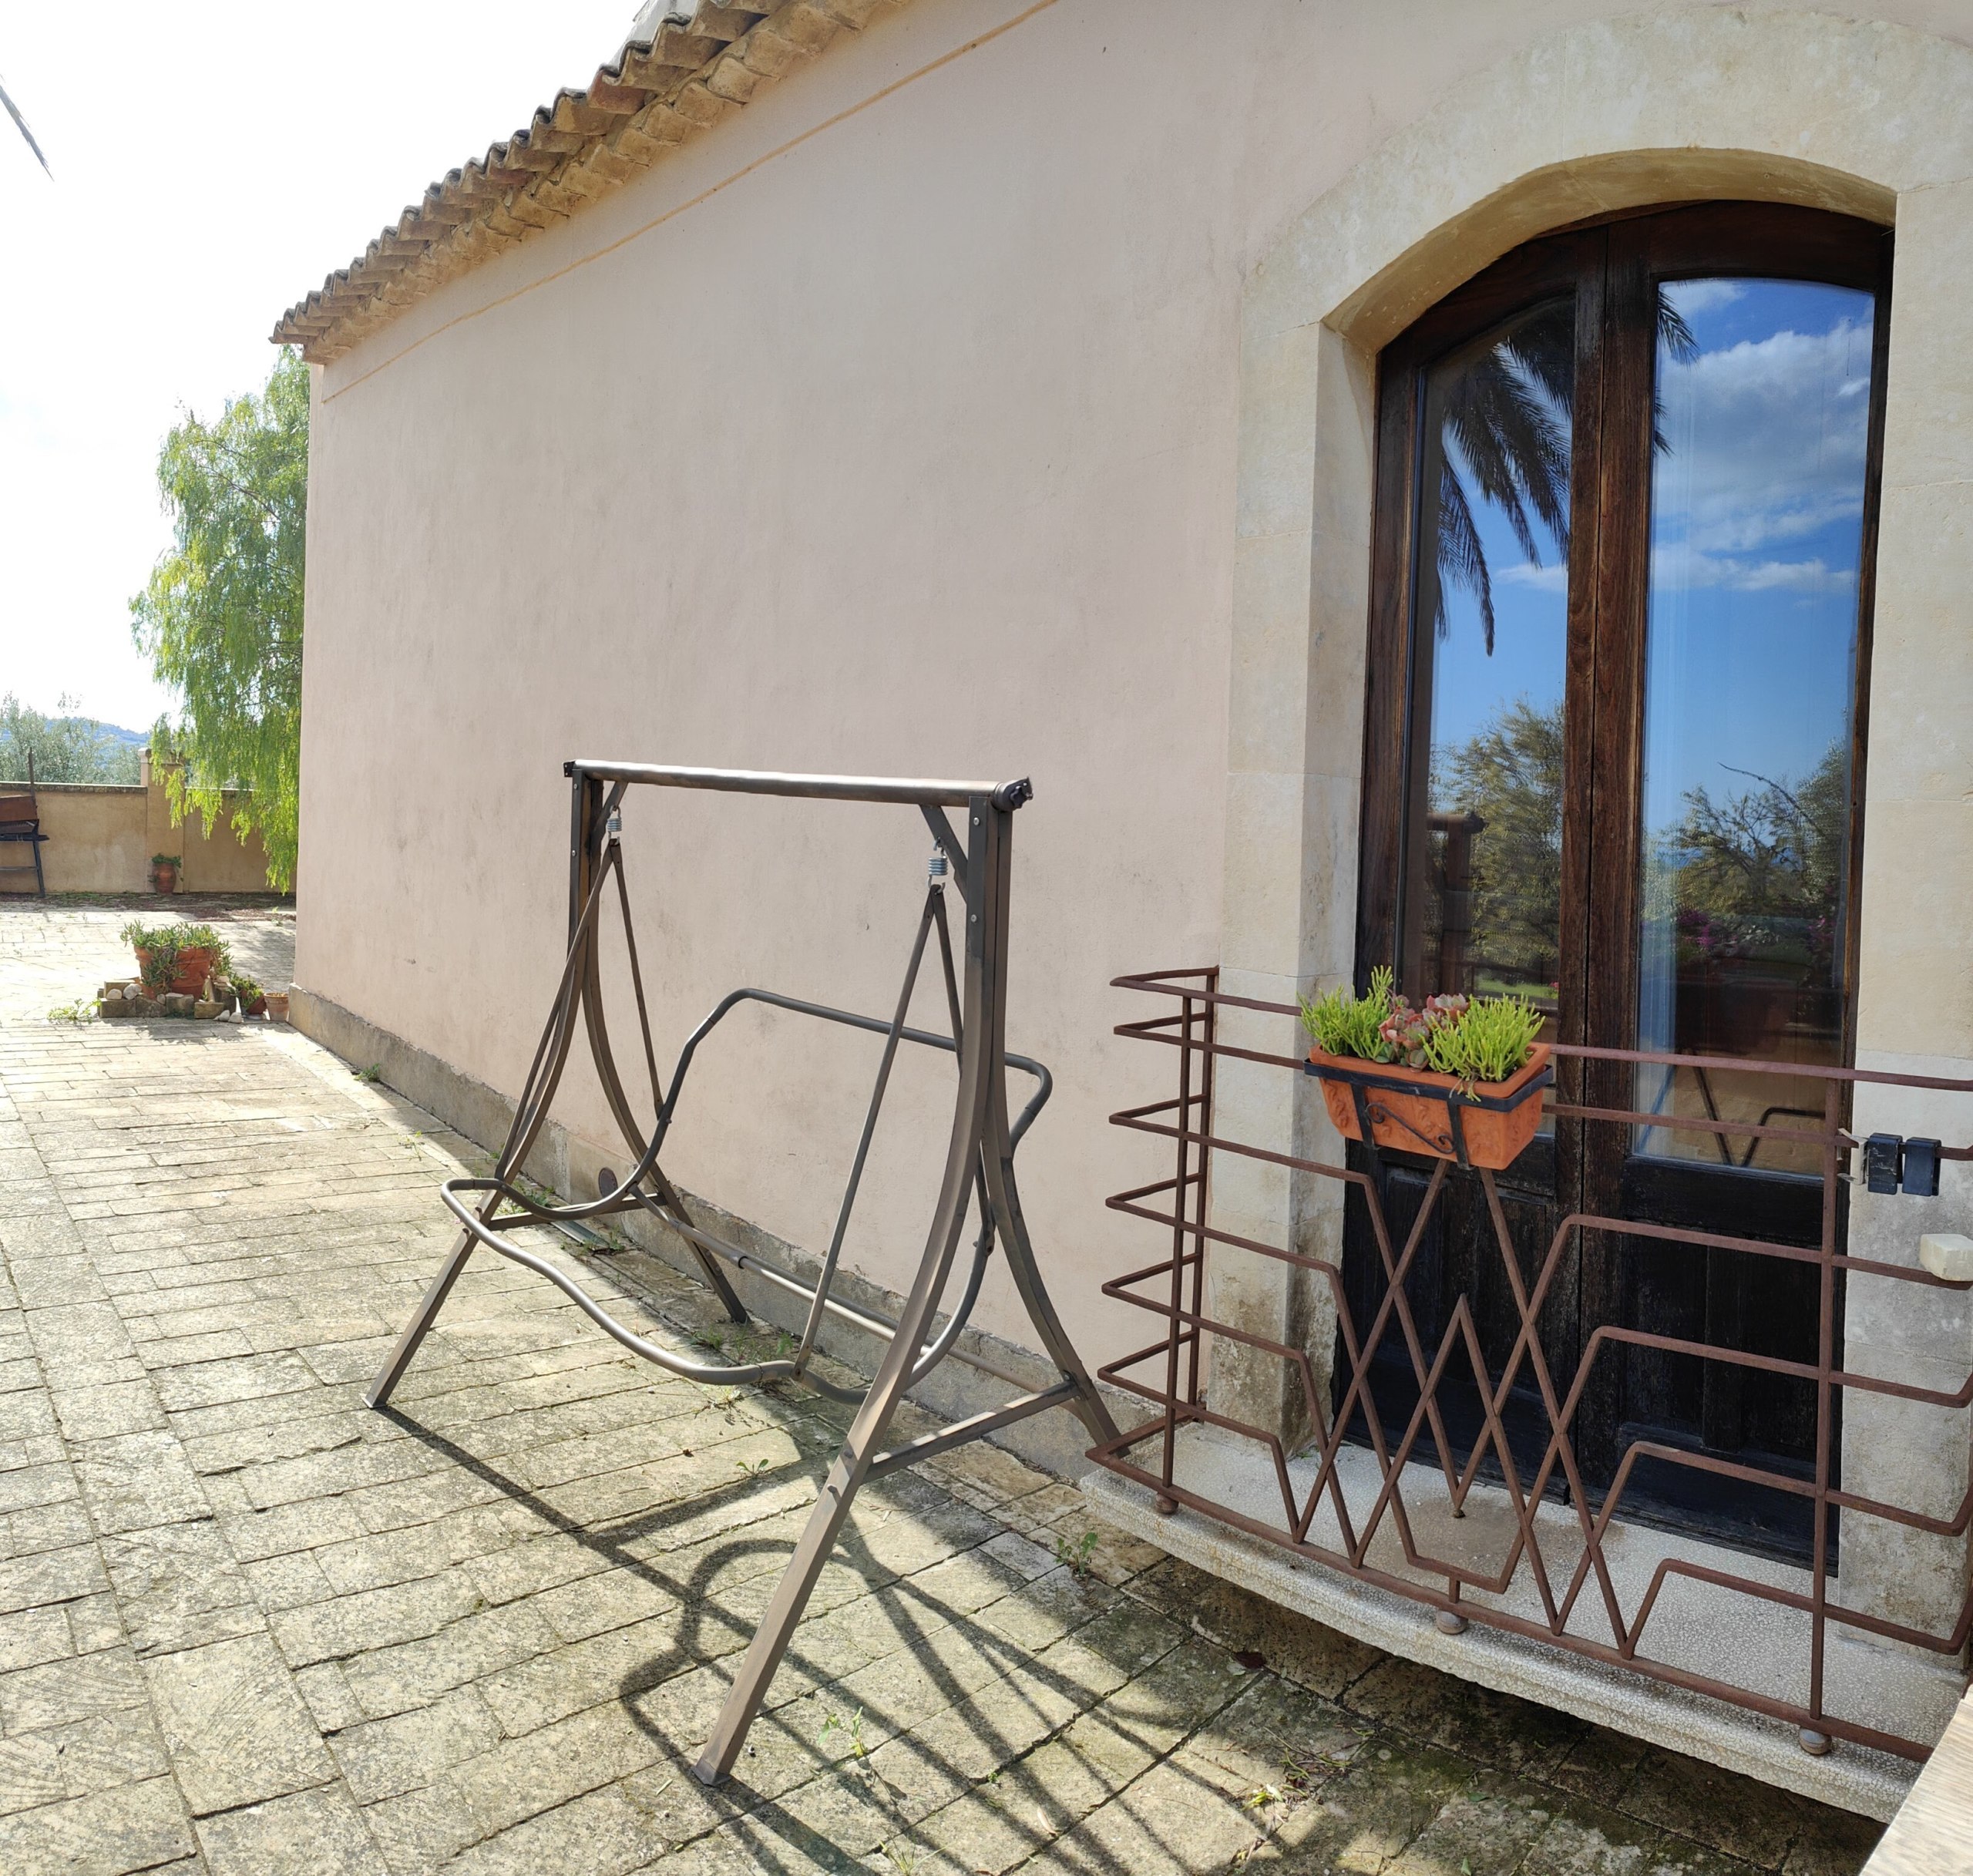 For sale "Casale Del Frantoio" a panoramic estate between Avola and Noto